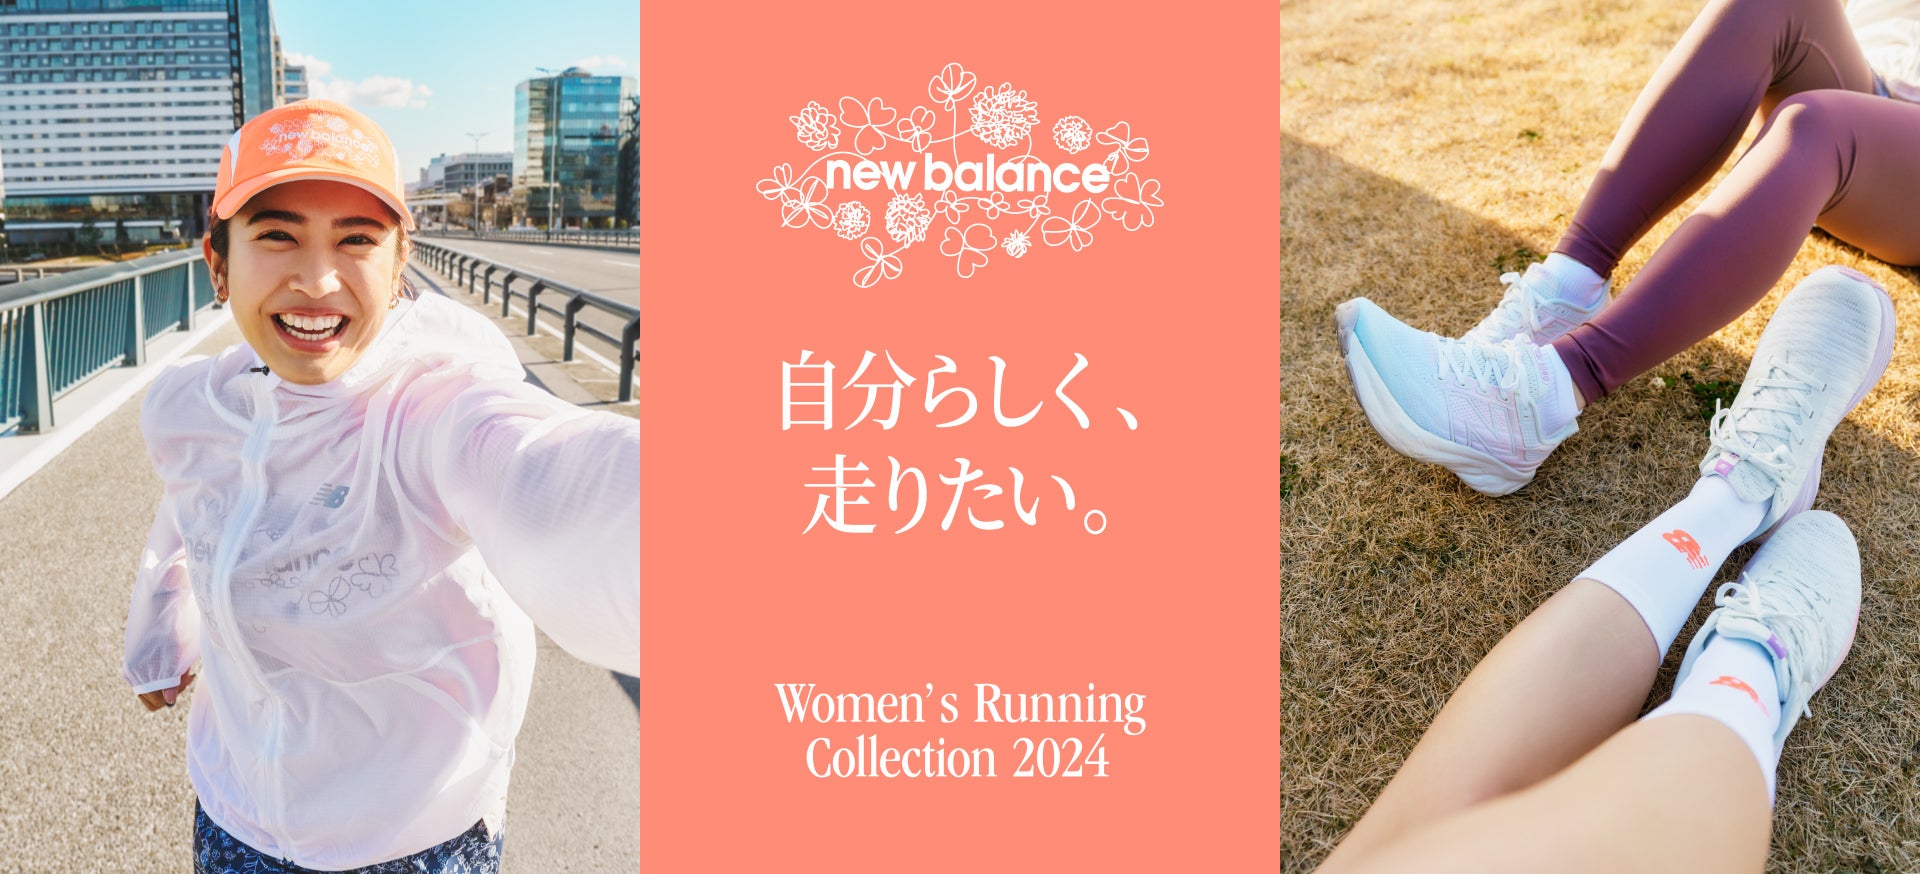 Women's Running Collection 2024